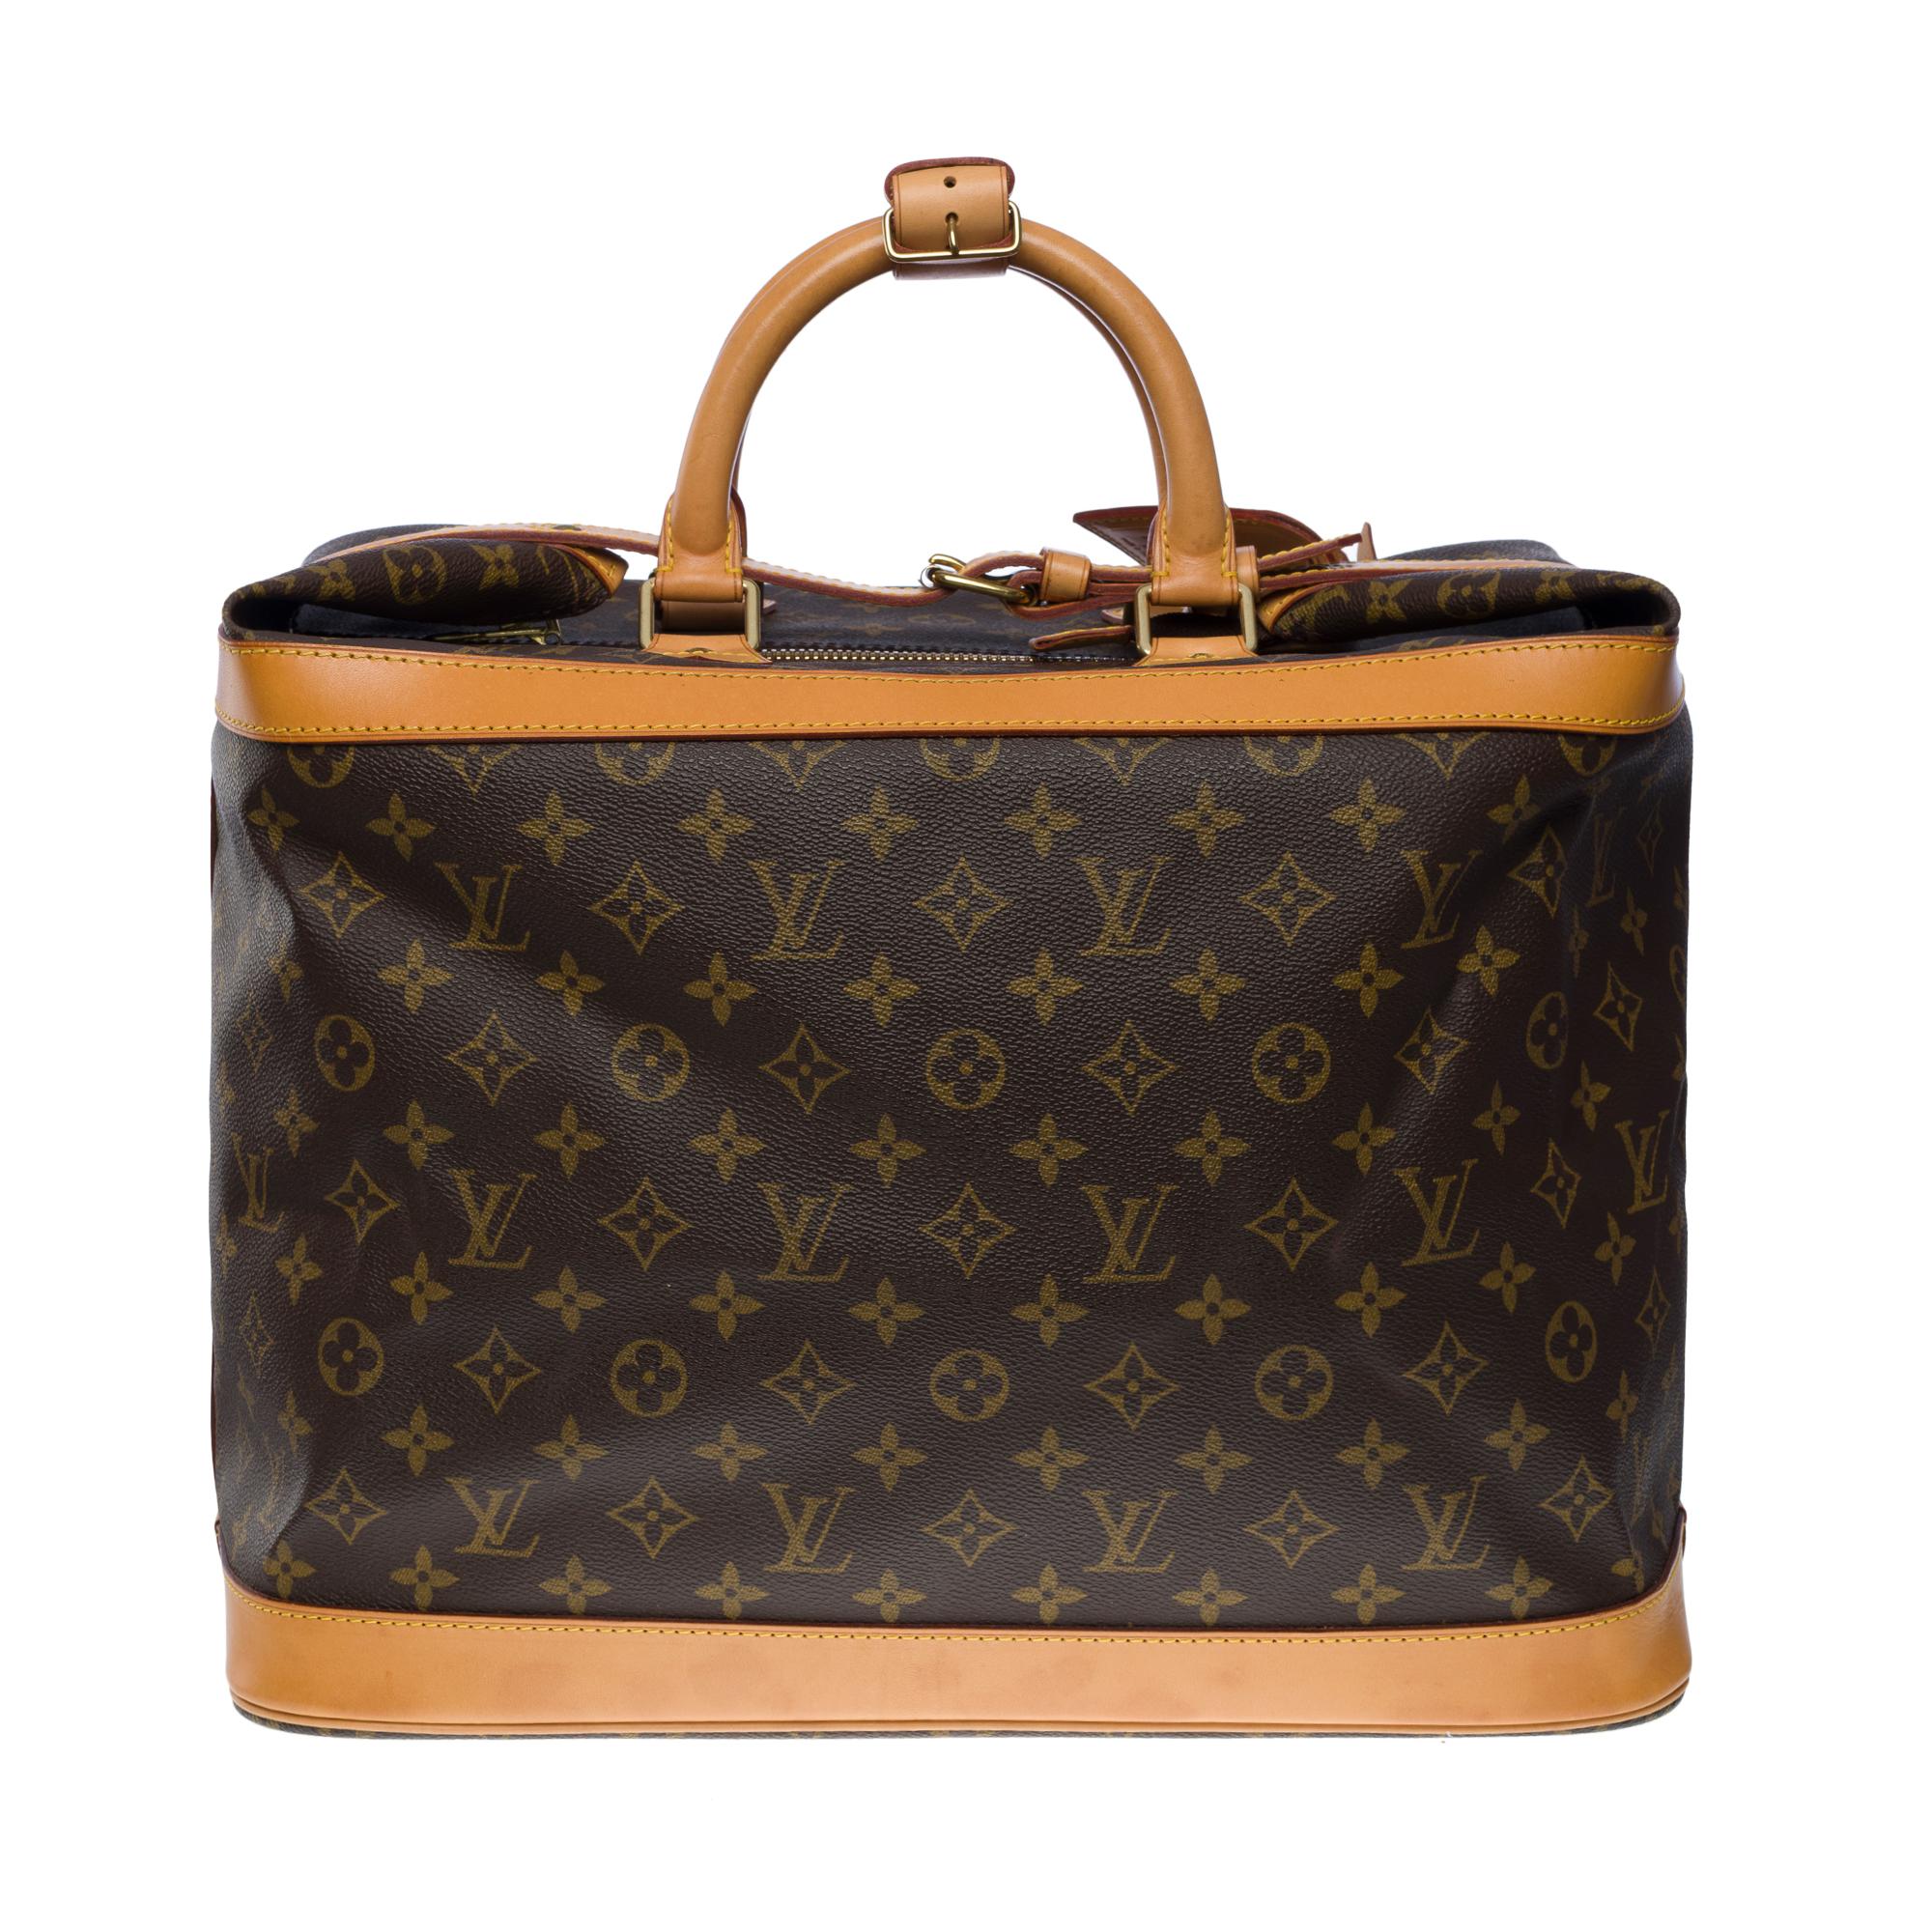 The indispensable Louis Vuitton Cruiser 40 travel bag in monogram coated canvas, gold plated metal hardware
Central zip closure on top and leather strap
Brown leather handles
Brown canvas interior
5 feet of gold metal base
Signature: 